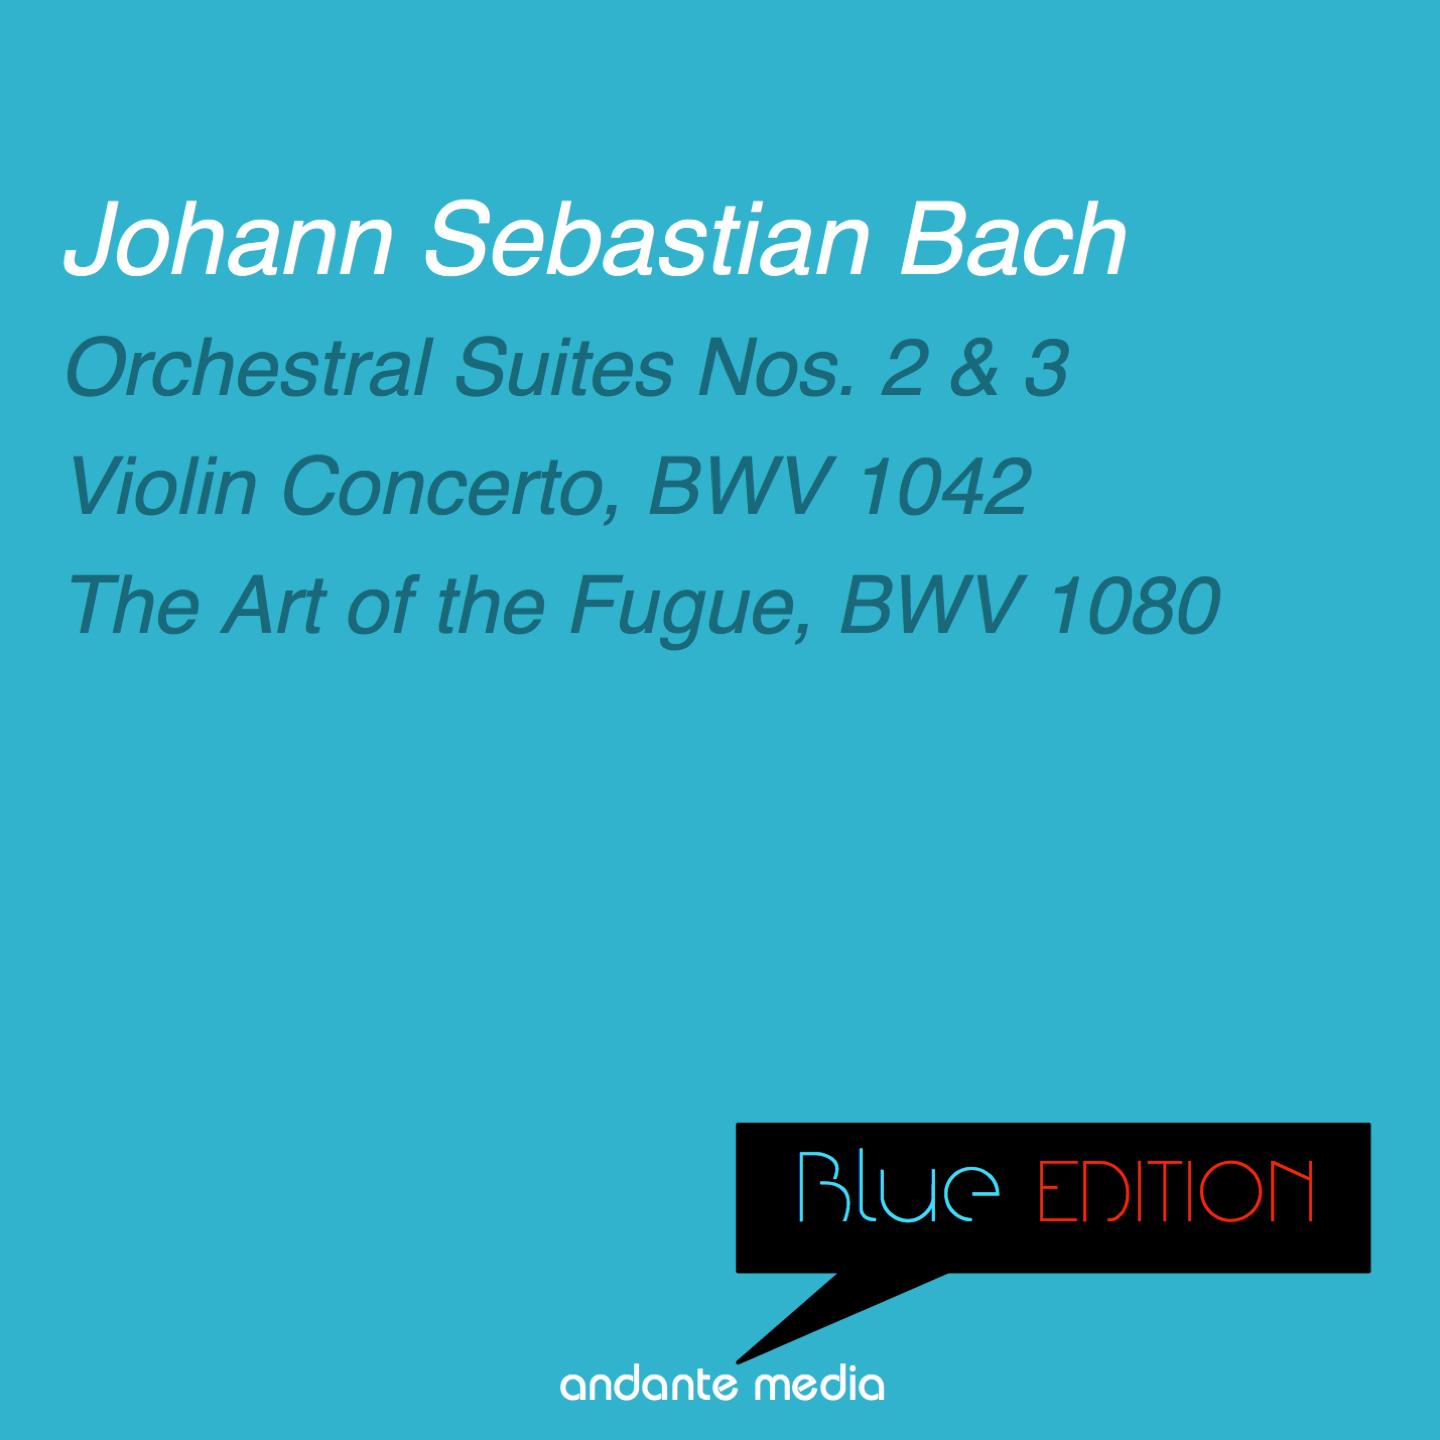 Orchestral Suite No. 2 in B Minor, BWV 1067: Polonaise - Double